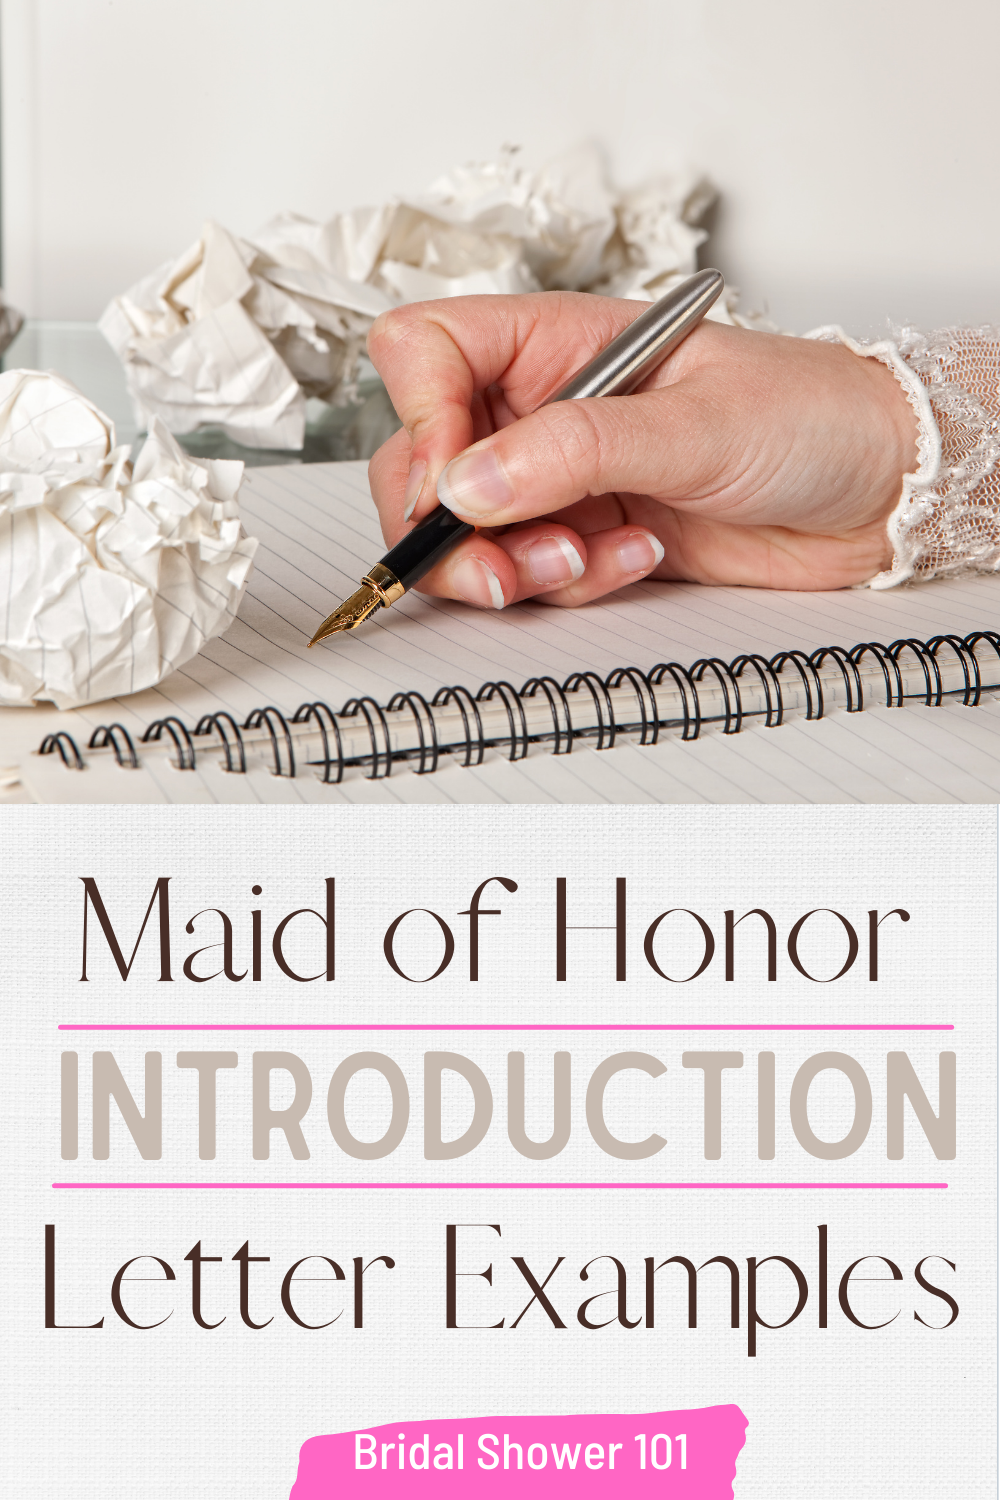 maid-of-honor-introduction-letter-to-bridesmaids-bridal-shower-101